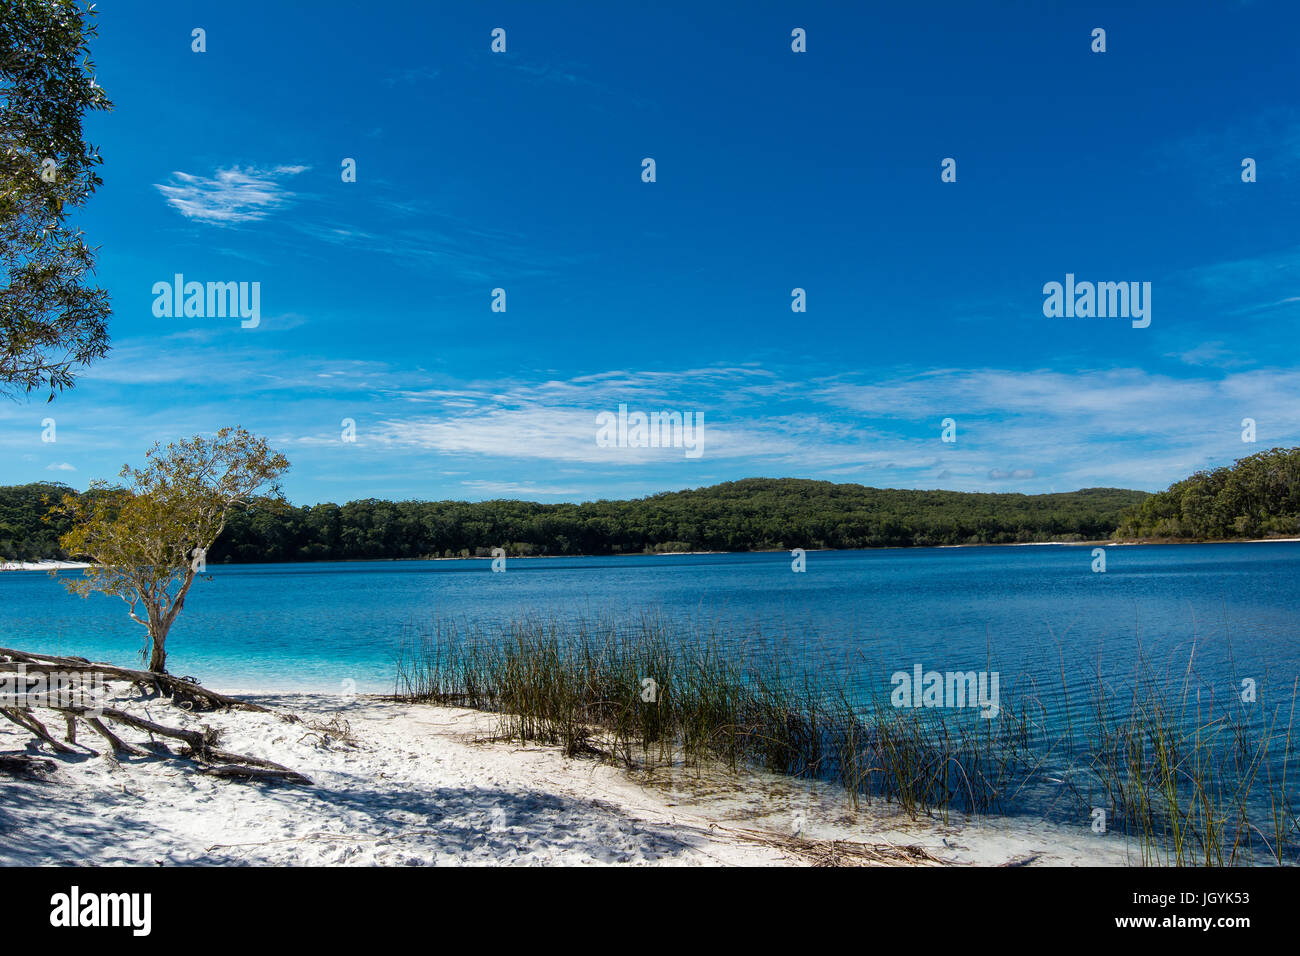 Tree and grass with crystal clear water and blue sky of the crater lake, Lake McKenzie on Fraser Island, Queensland, Australia. Stock Photo